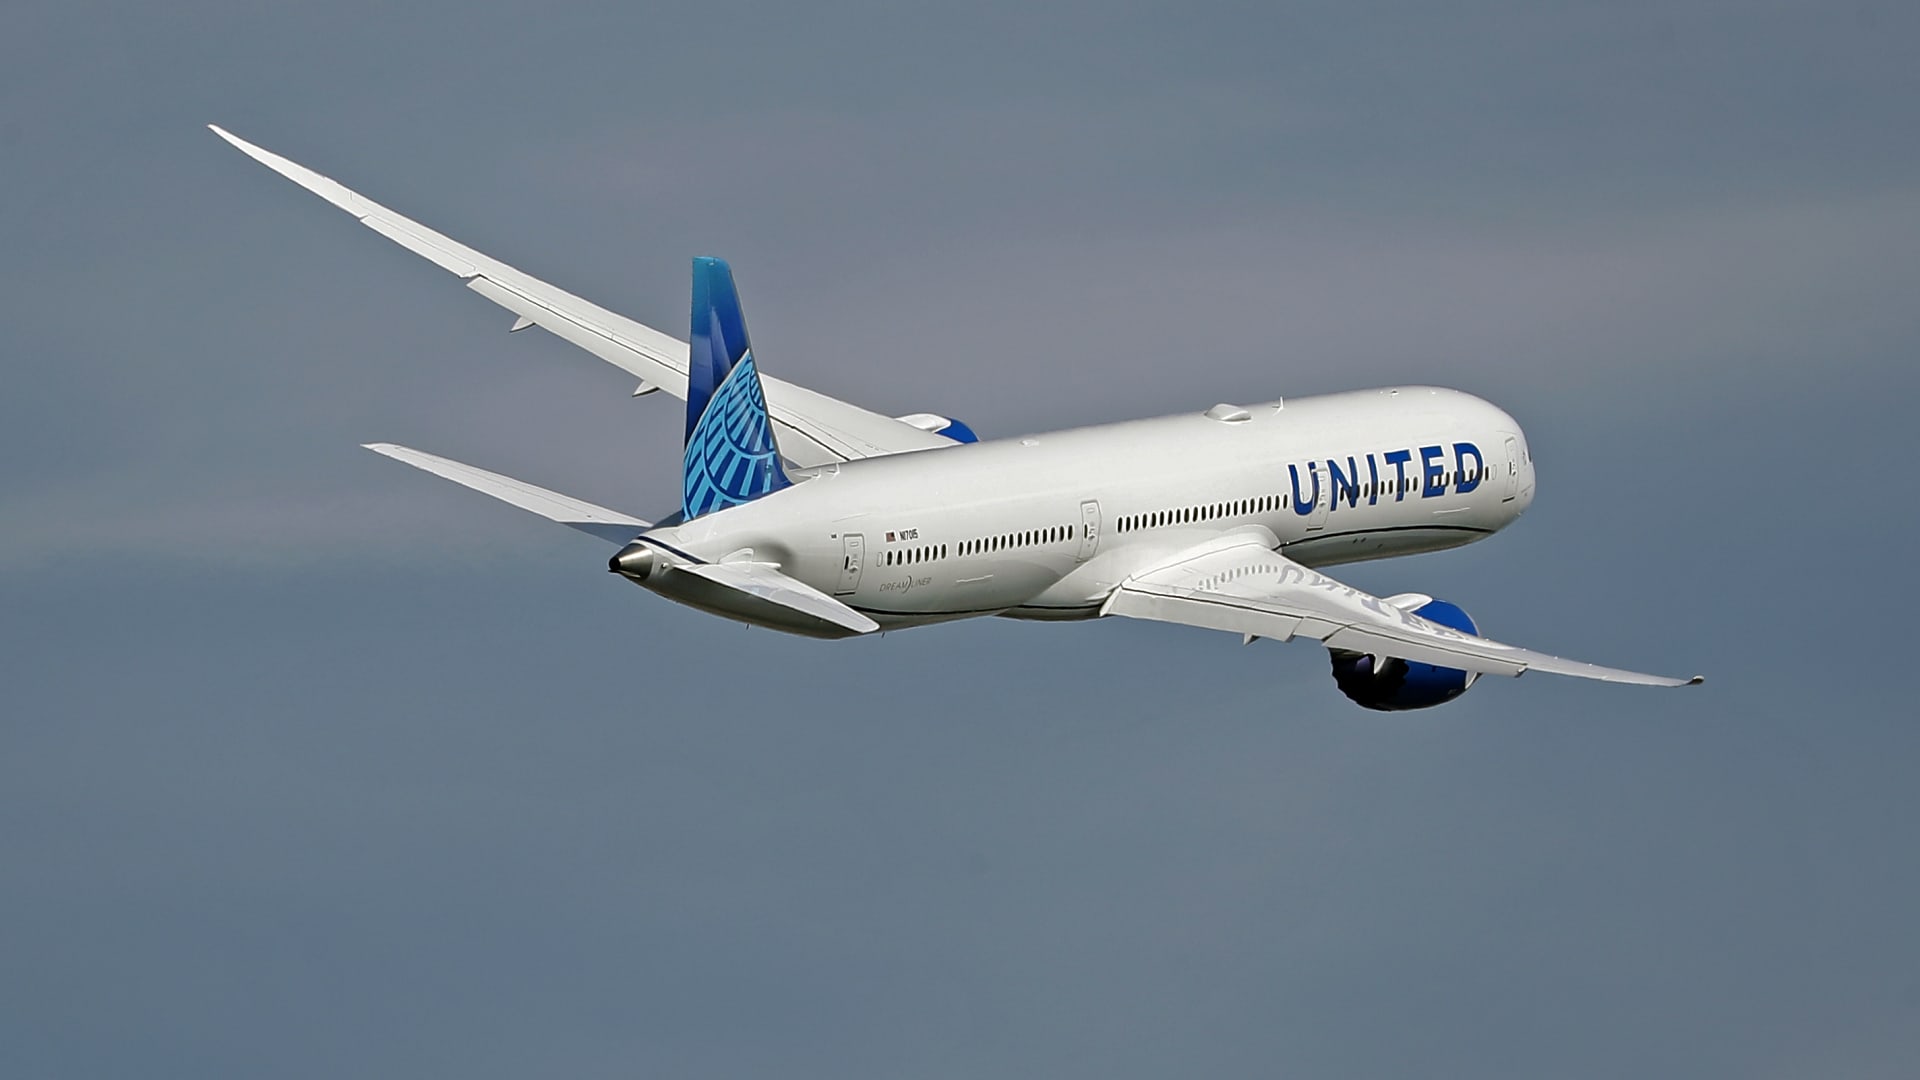 United asks pilots to take unpaid time off, citing Boeing's delayed aircraft